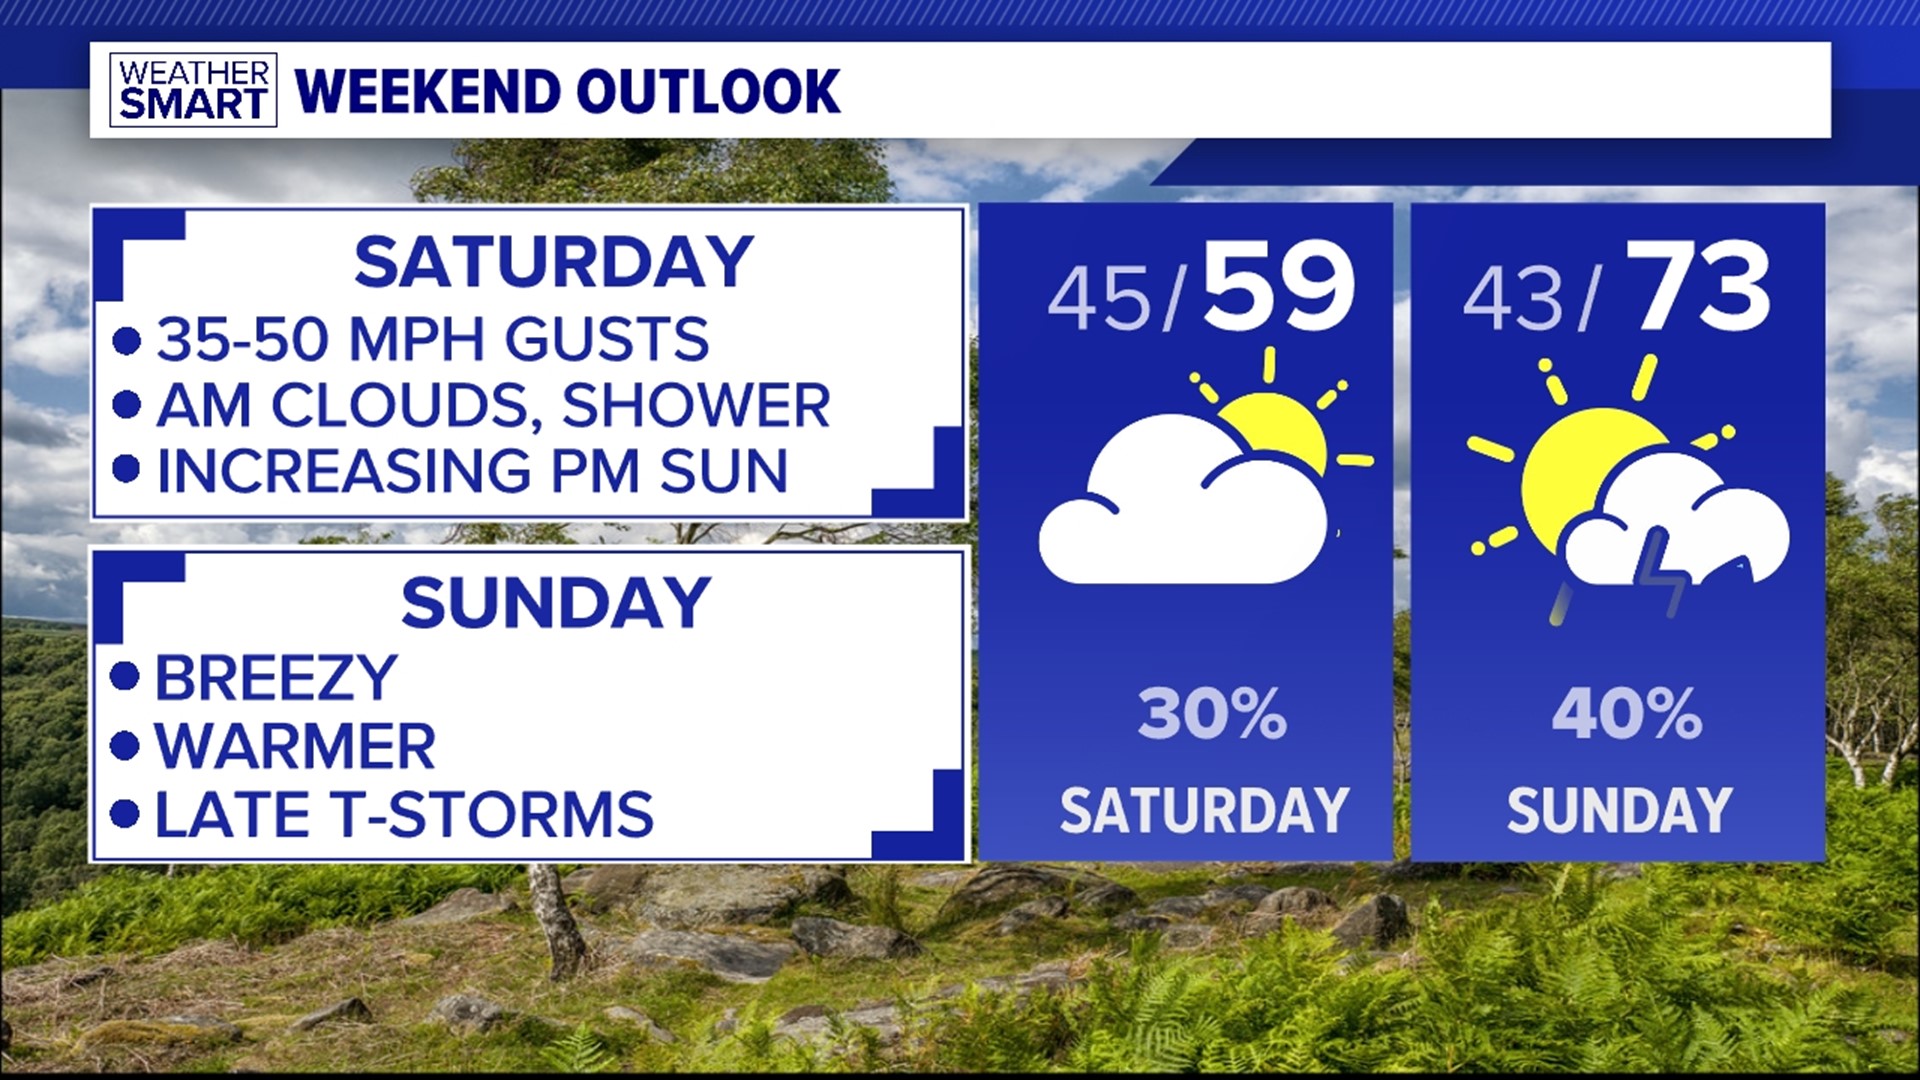 Conditions will be windy but generally dry this weekend. We will need to watch a morning shower on Saturday and then an evening storm chance, but it's not a wash.